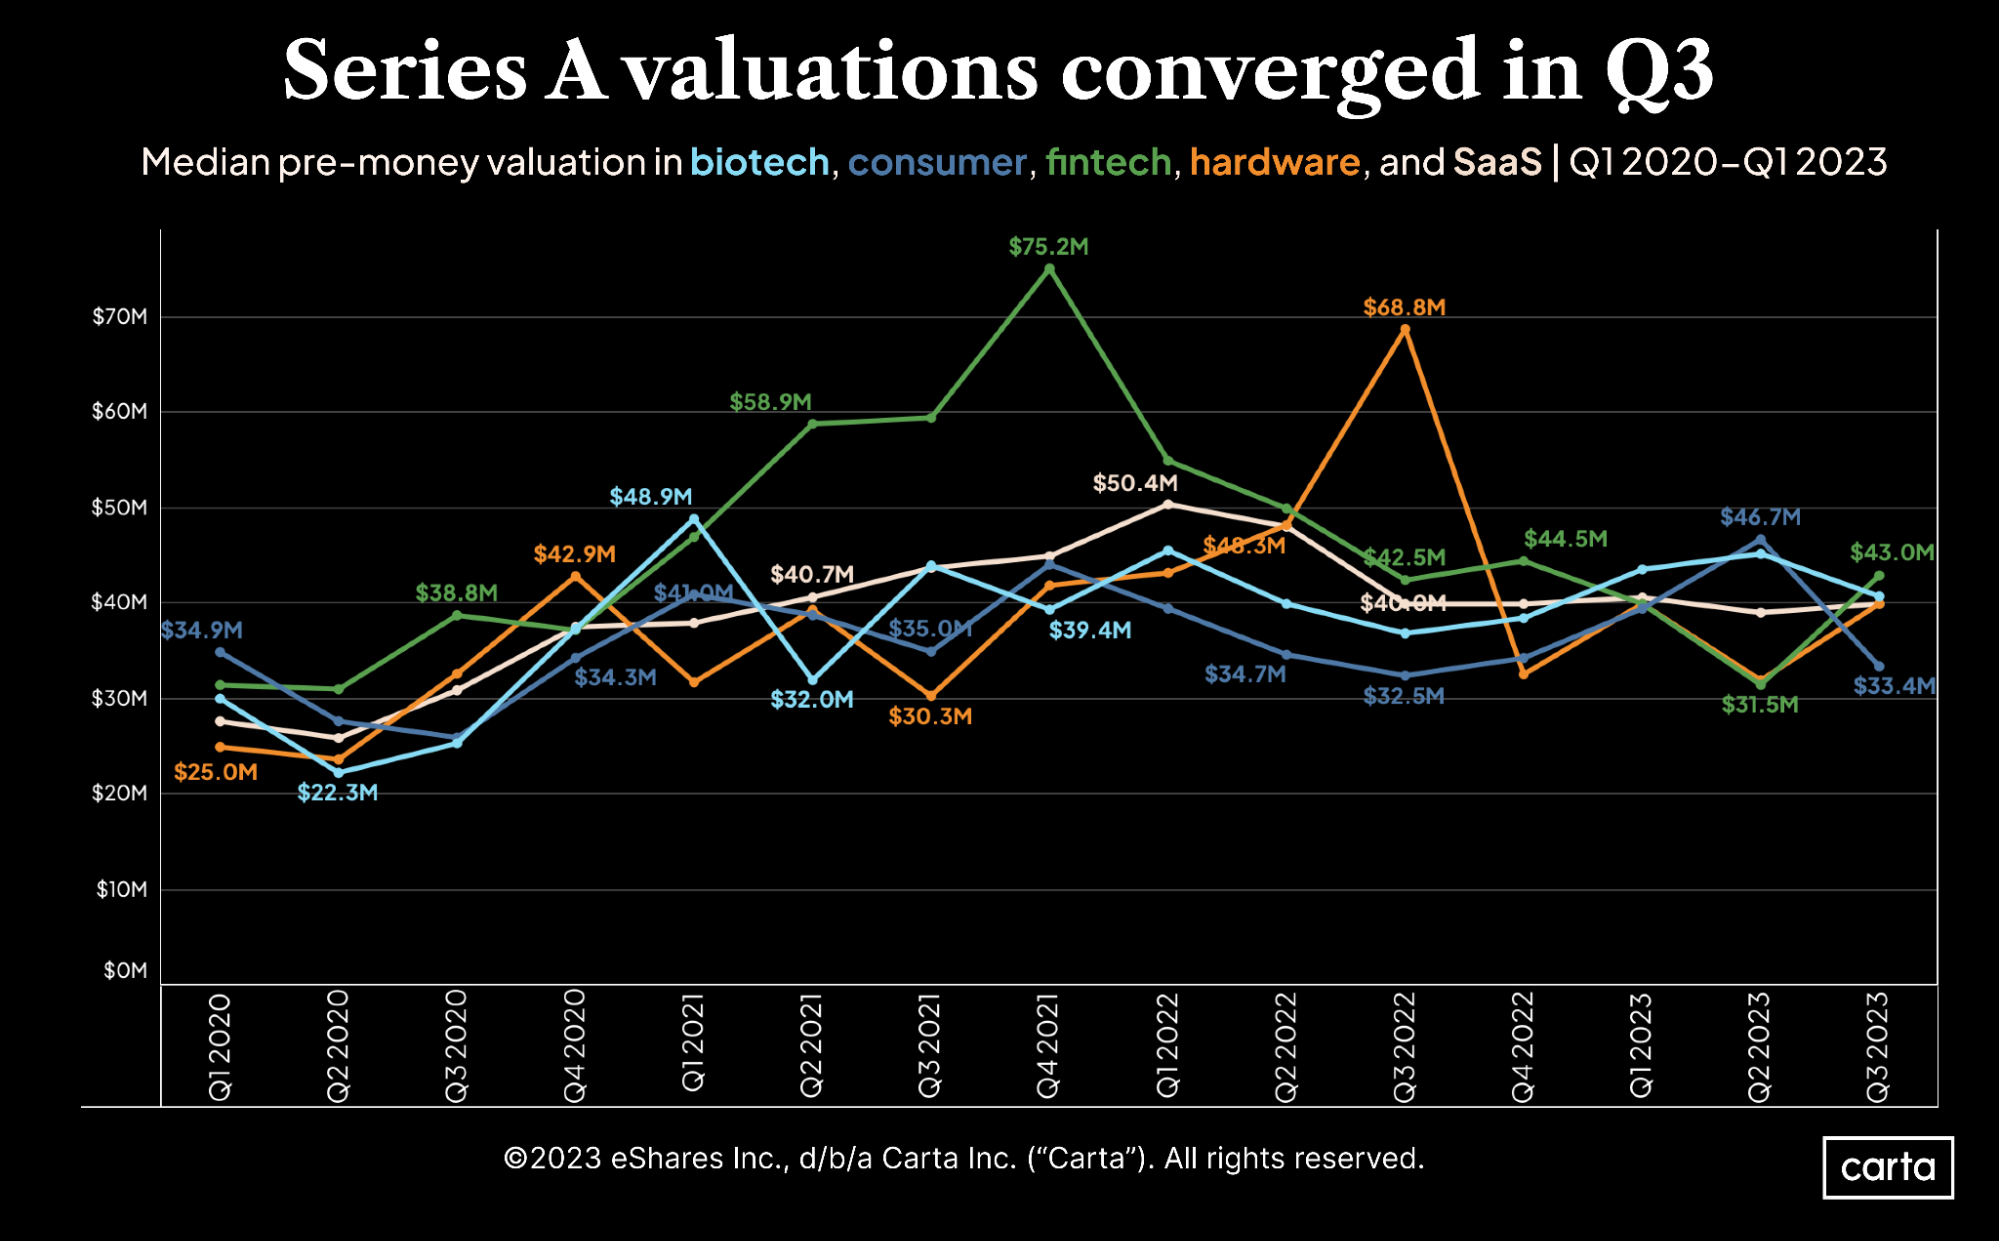 Series A valuations converged in Q3